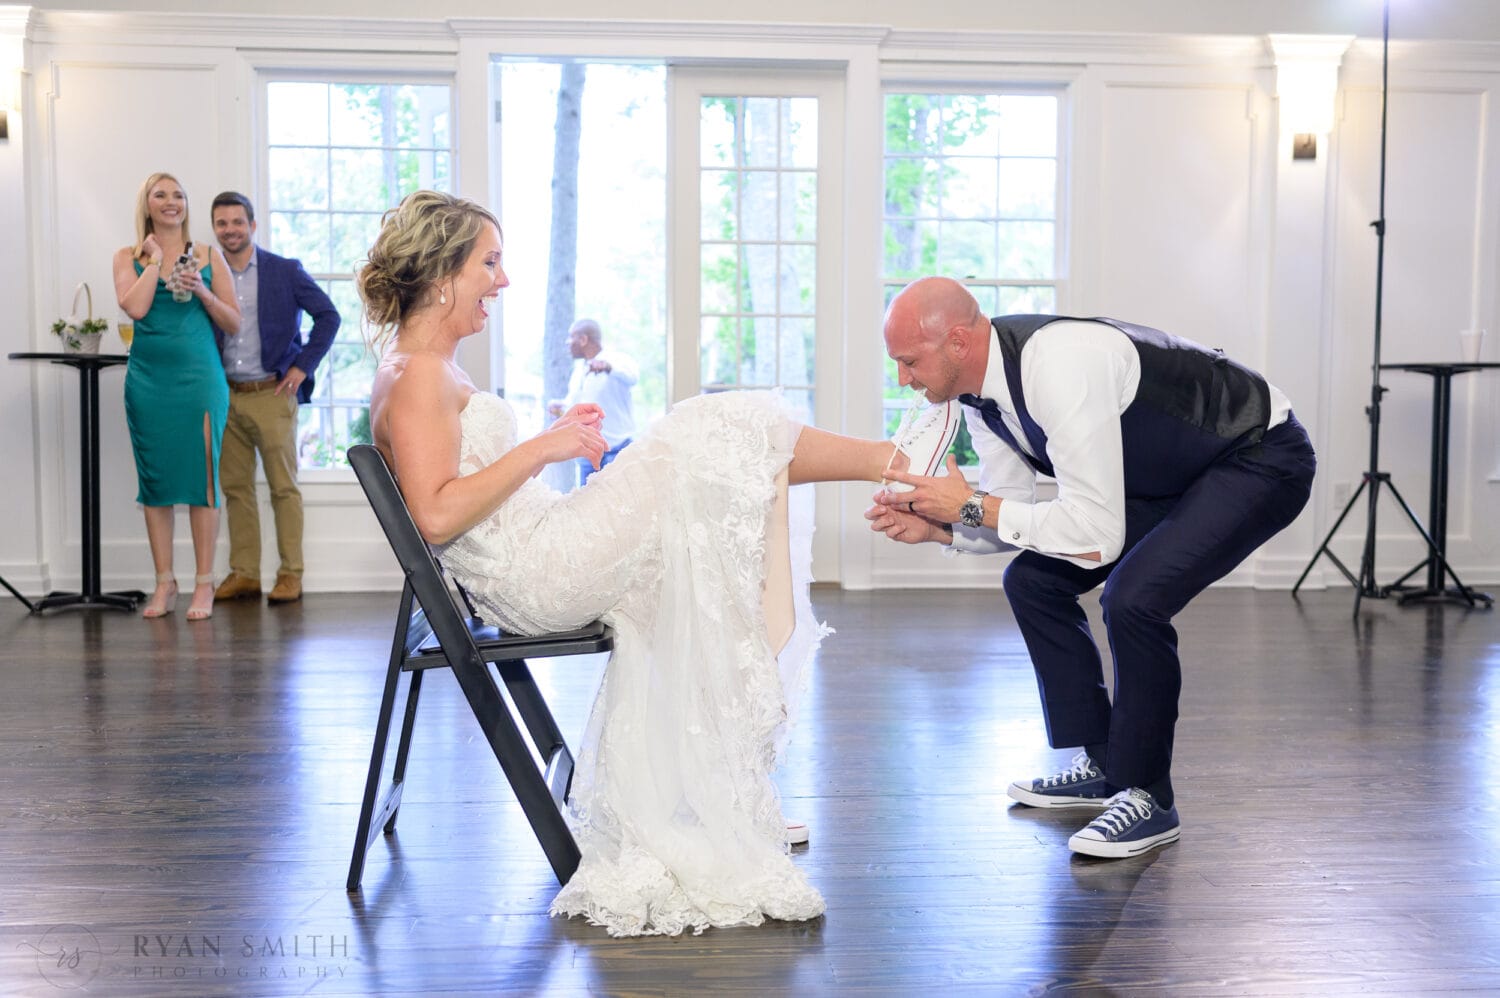 Groom taking off the garter - The Village House at Litchfield